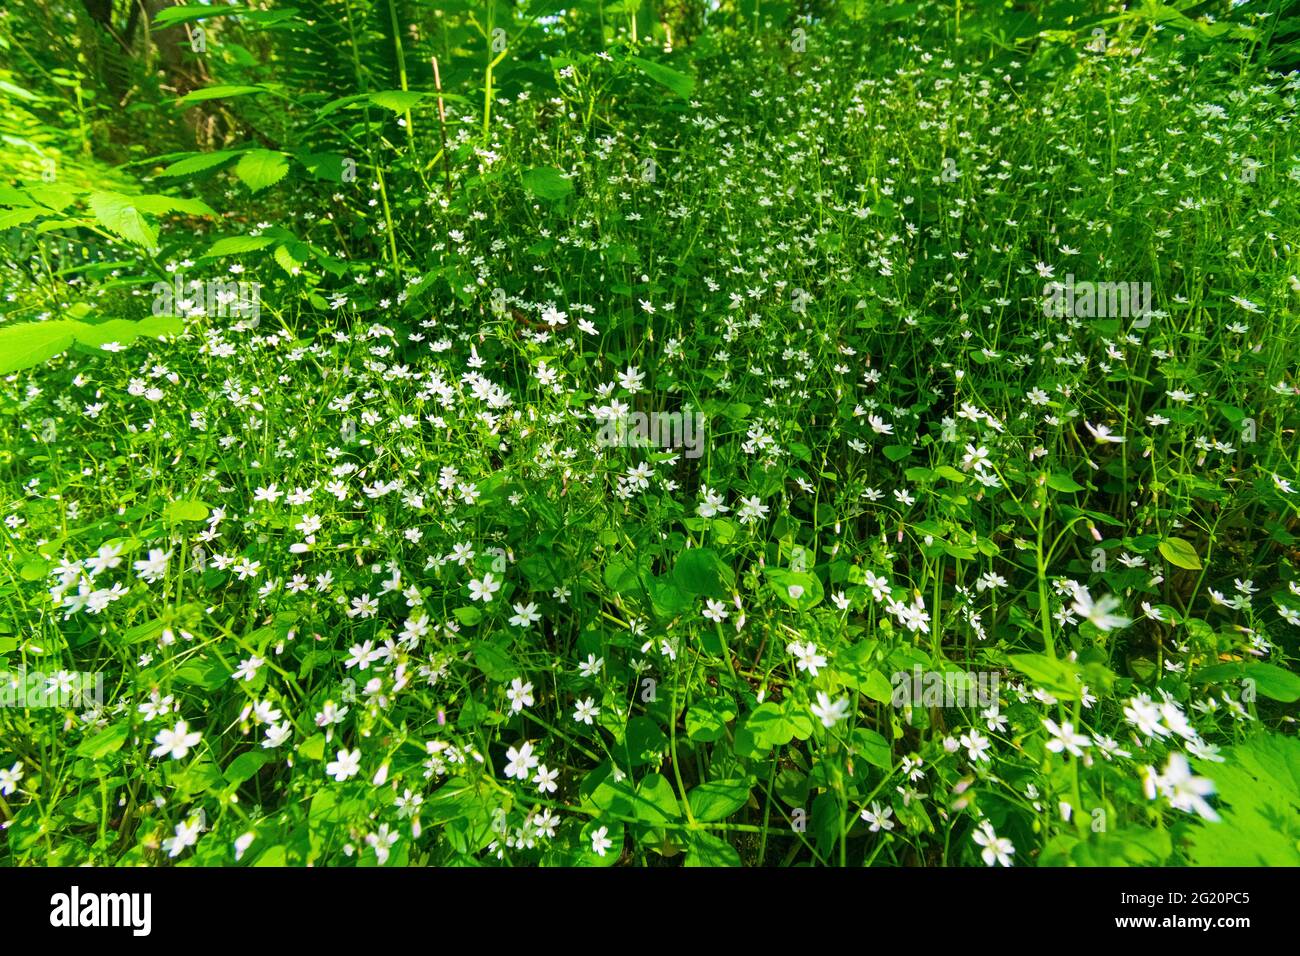 A pop of white flowers against a lush green backdrop in forest Stock Photo